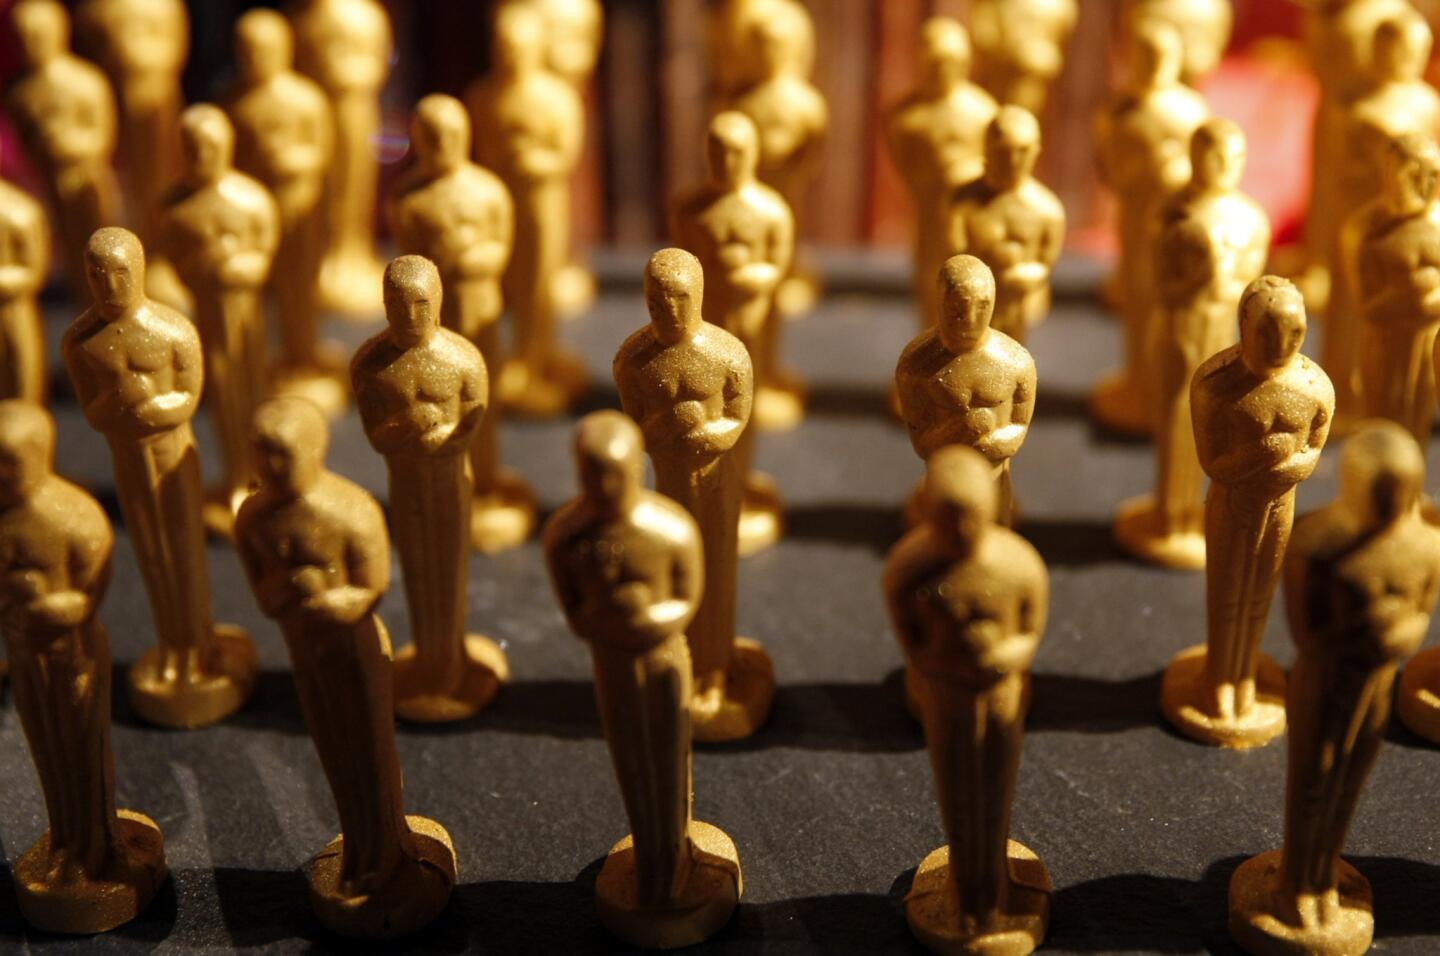 An army of chocolate Oscar statuettes stands ready to be offered at the Oscars Governors Ball.